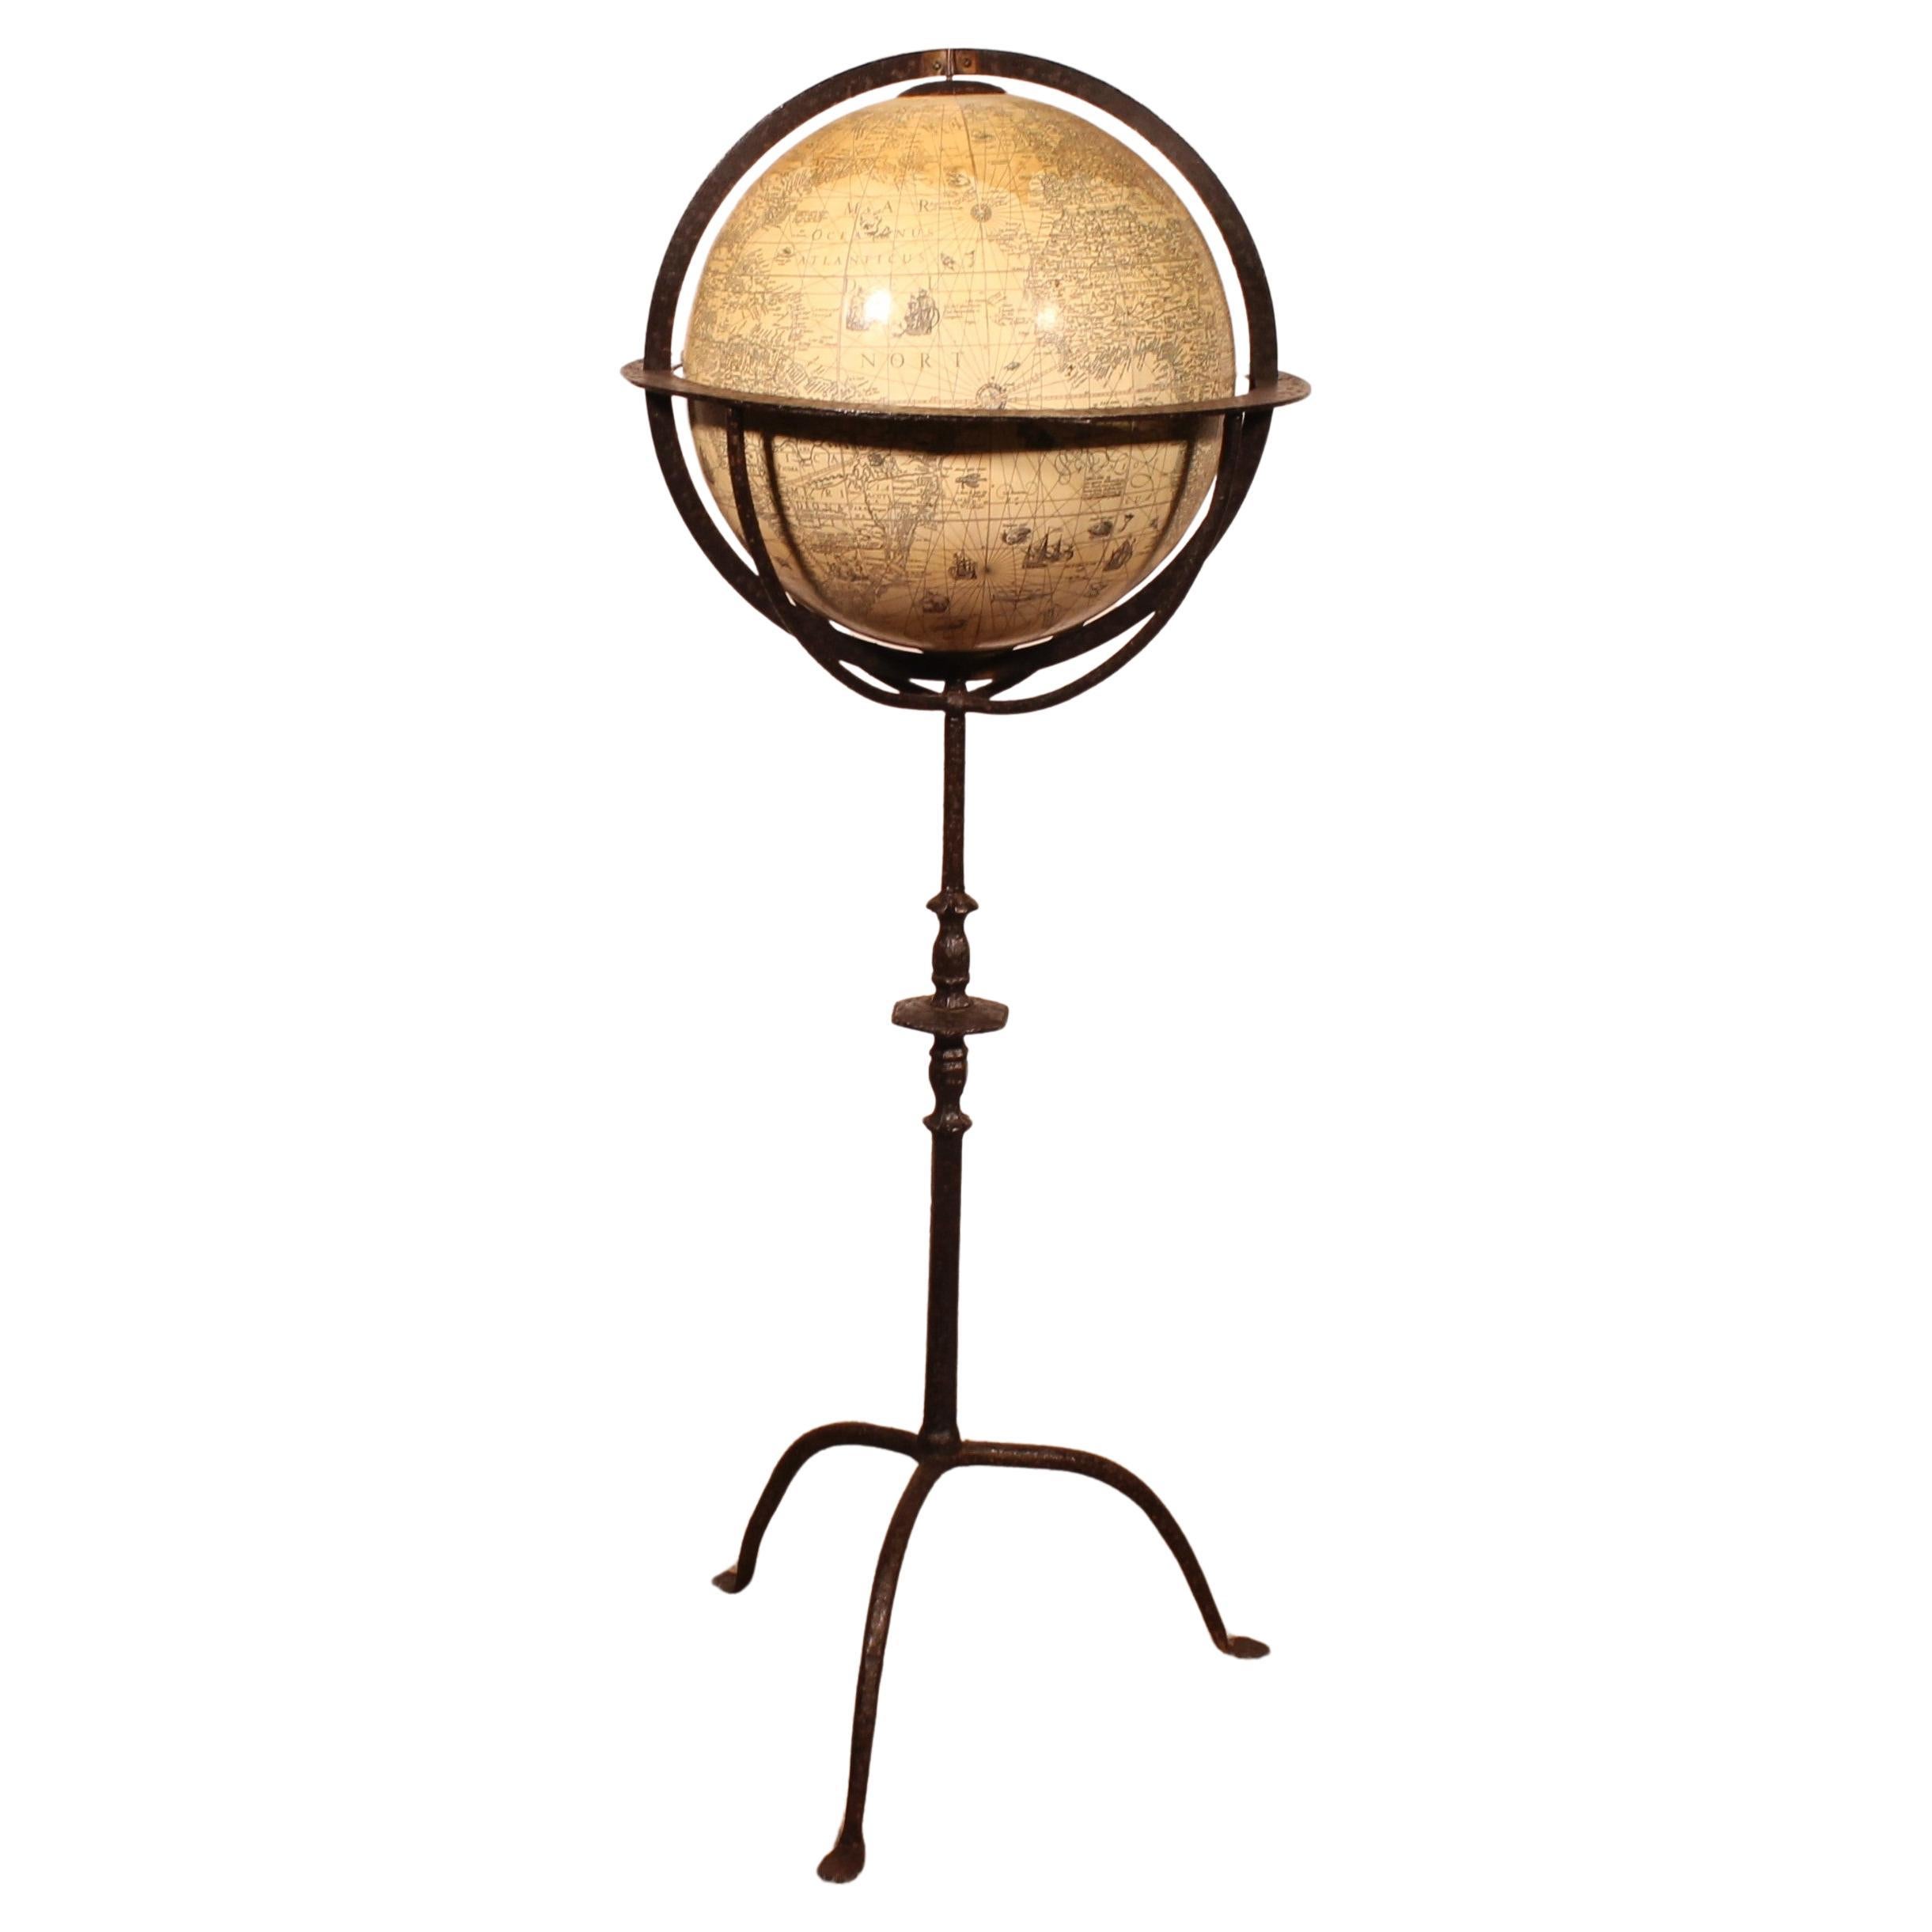 A Library Terrestrial Globe With Wrought Iron Base